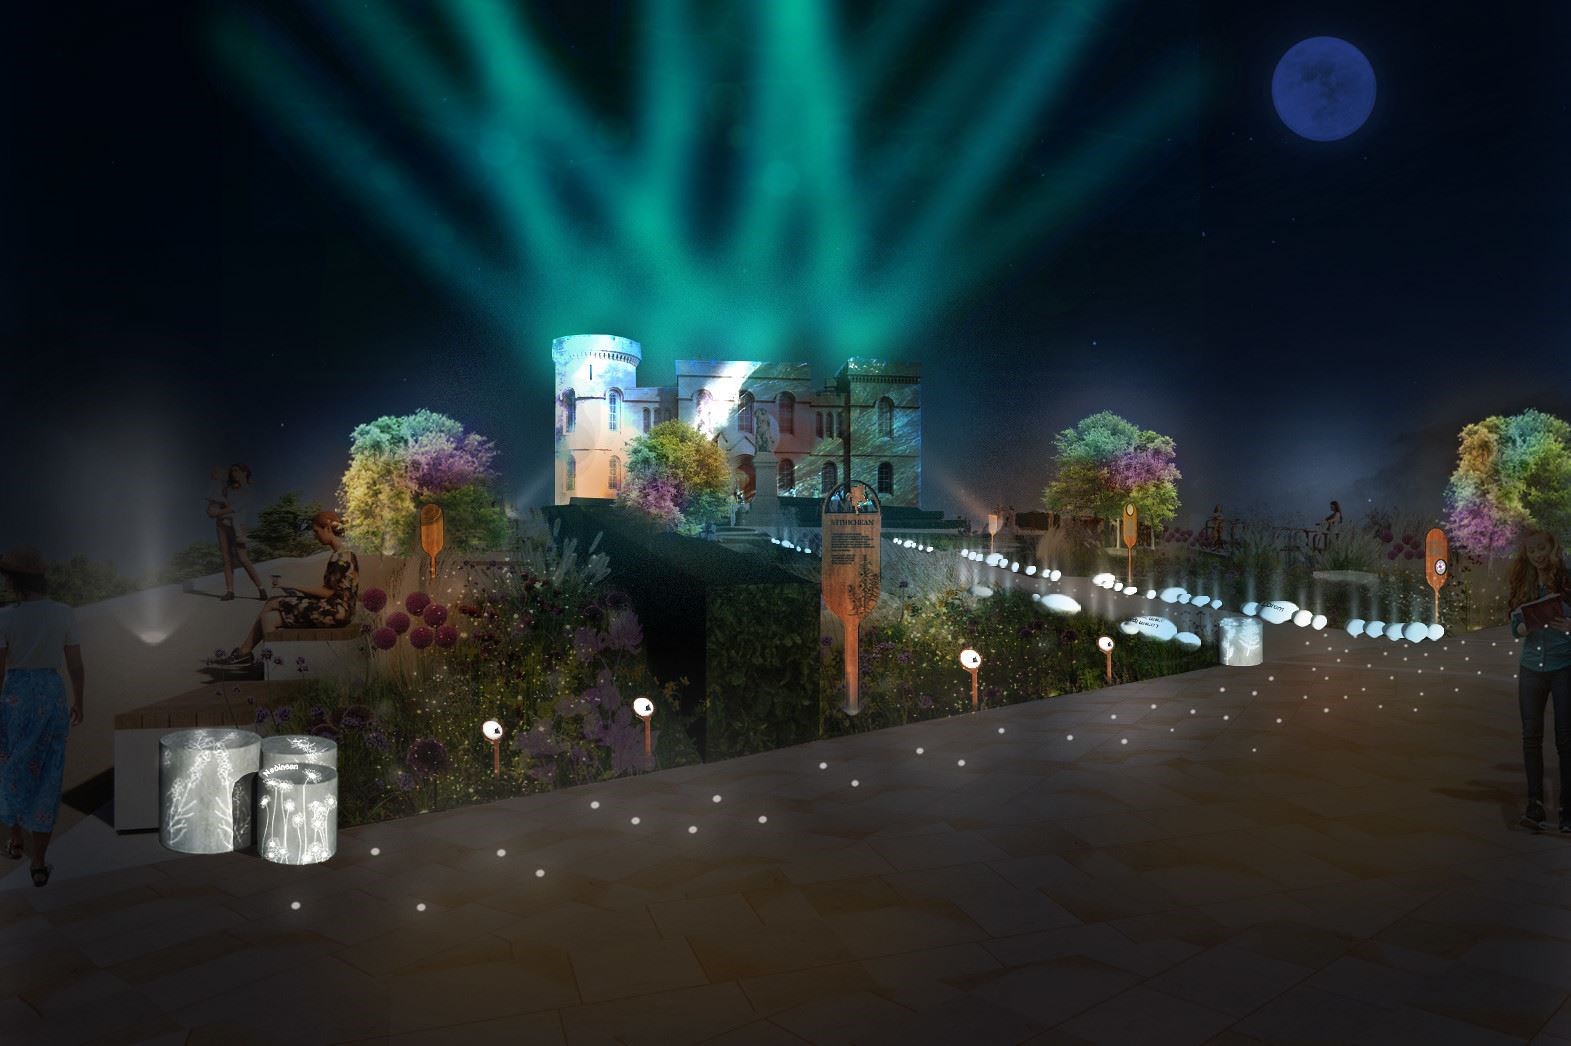 At night the Inverness Castle garden comes to life, bringing lights and colour into the space including an atmospheric castle projection at special events.